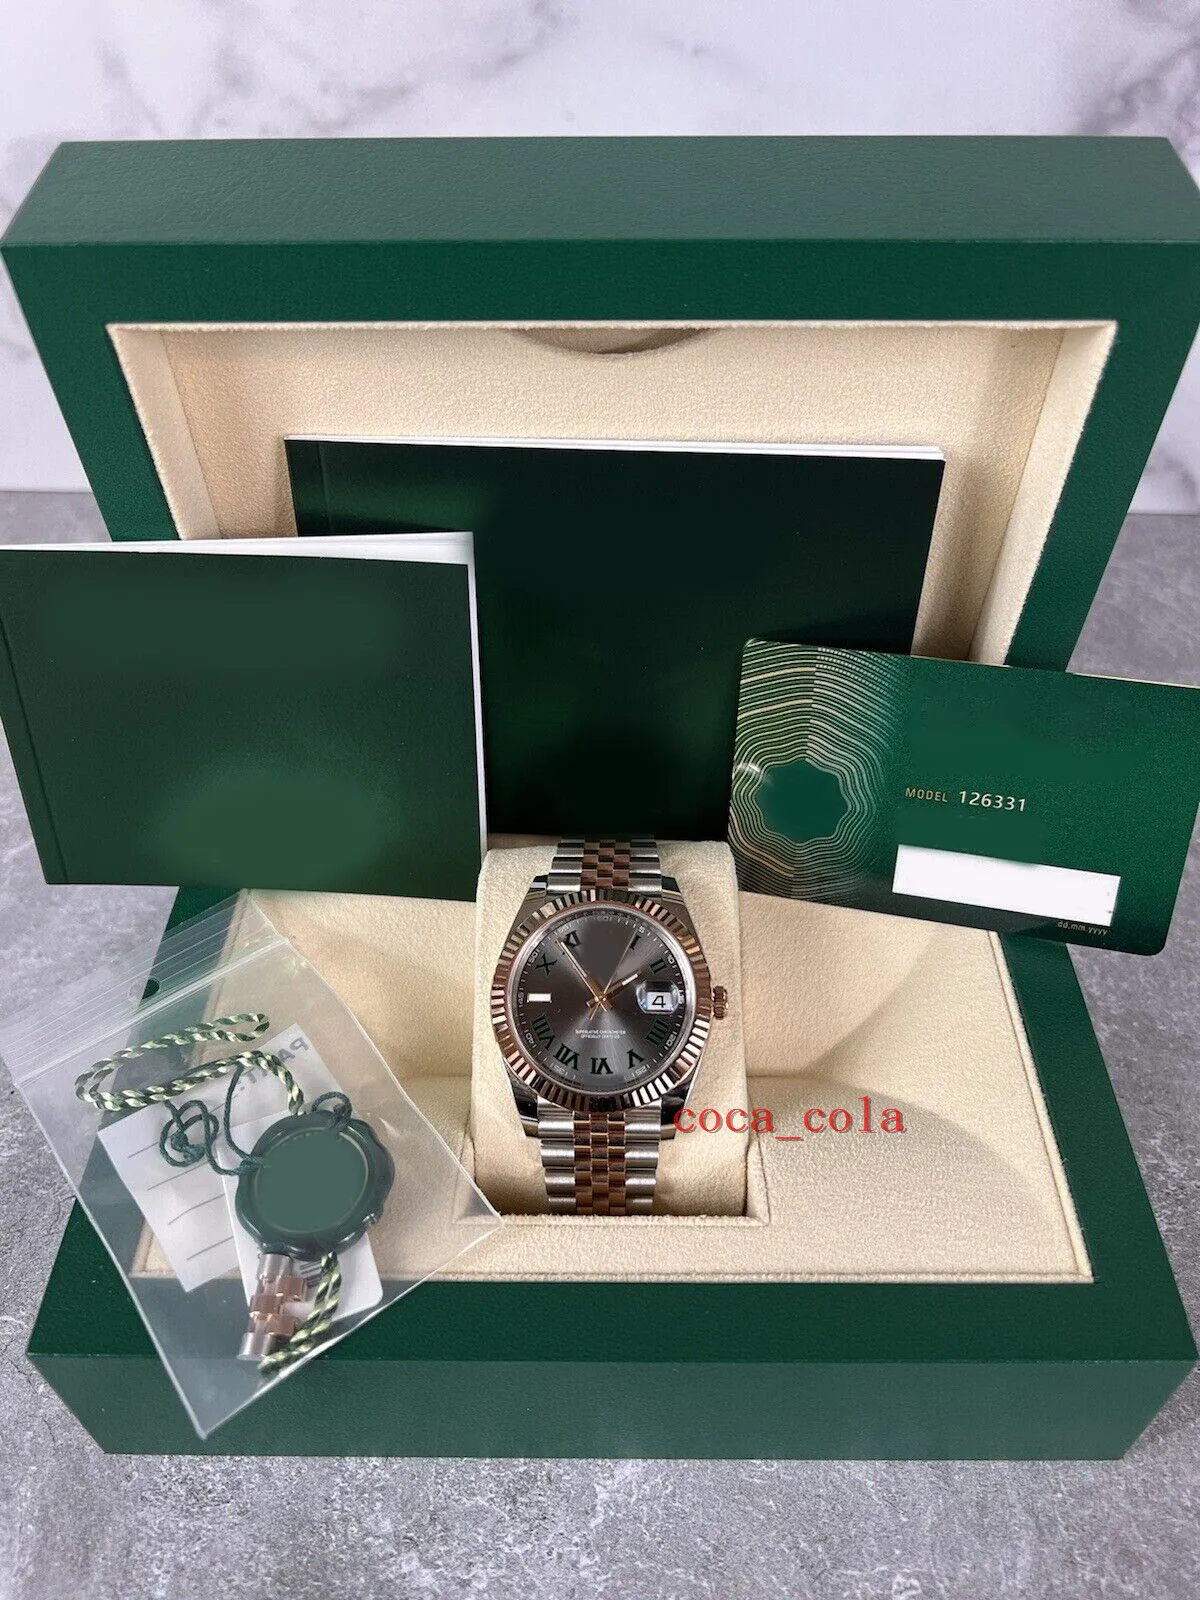 2023 QC Check Wristwatch 41mm Datejust 41 Toin to Tone Rose Gold Wimbledon Jubilee 126331 Mechanical Automatic Movement Watches Watches Box/Papers